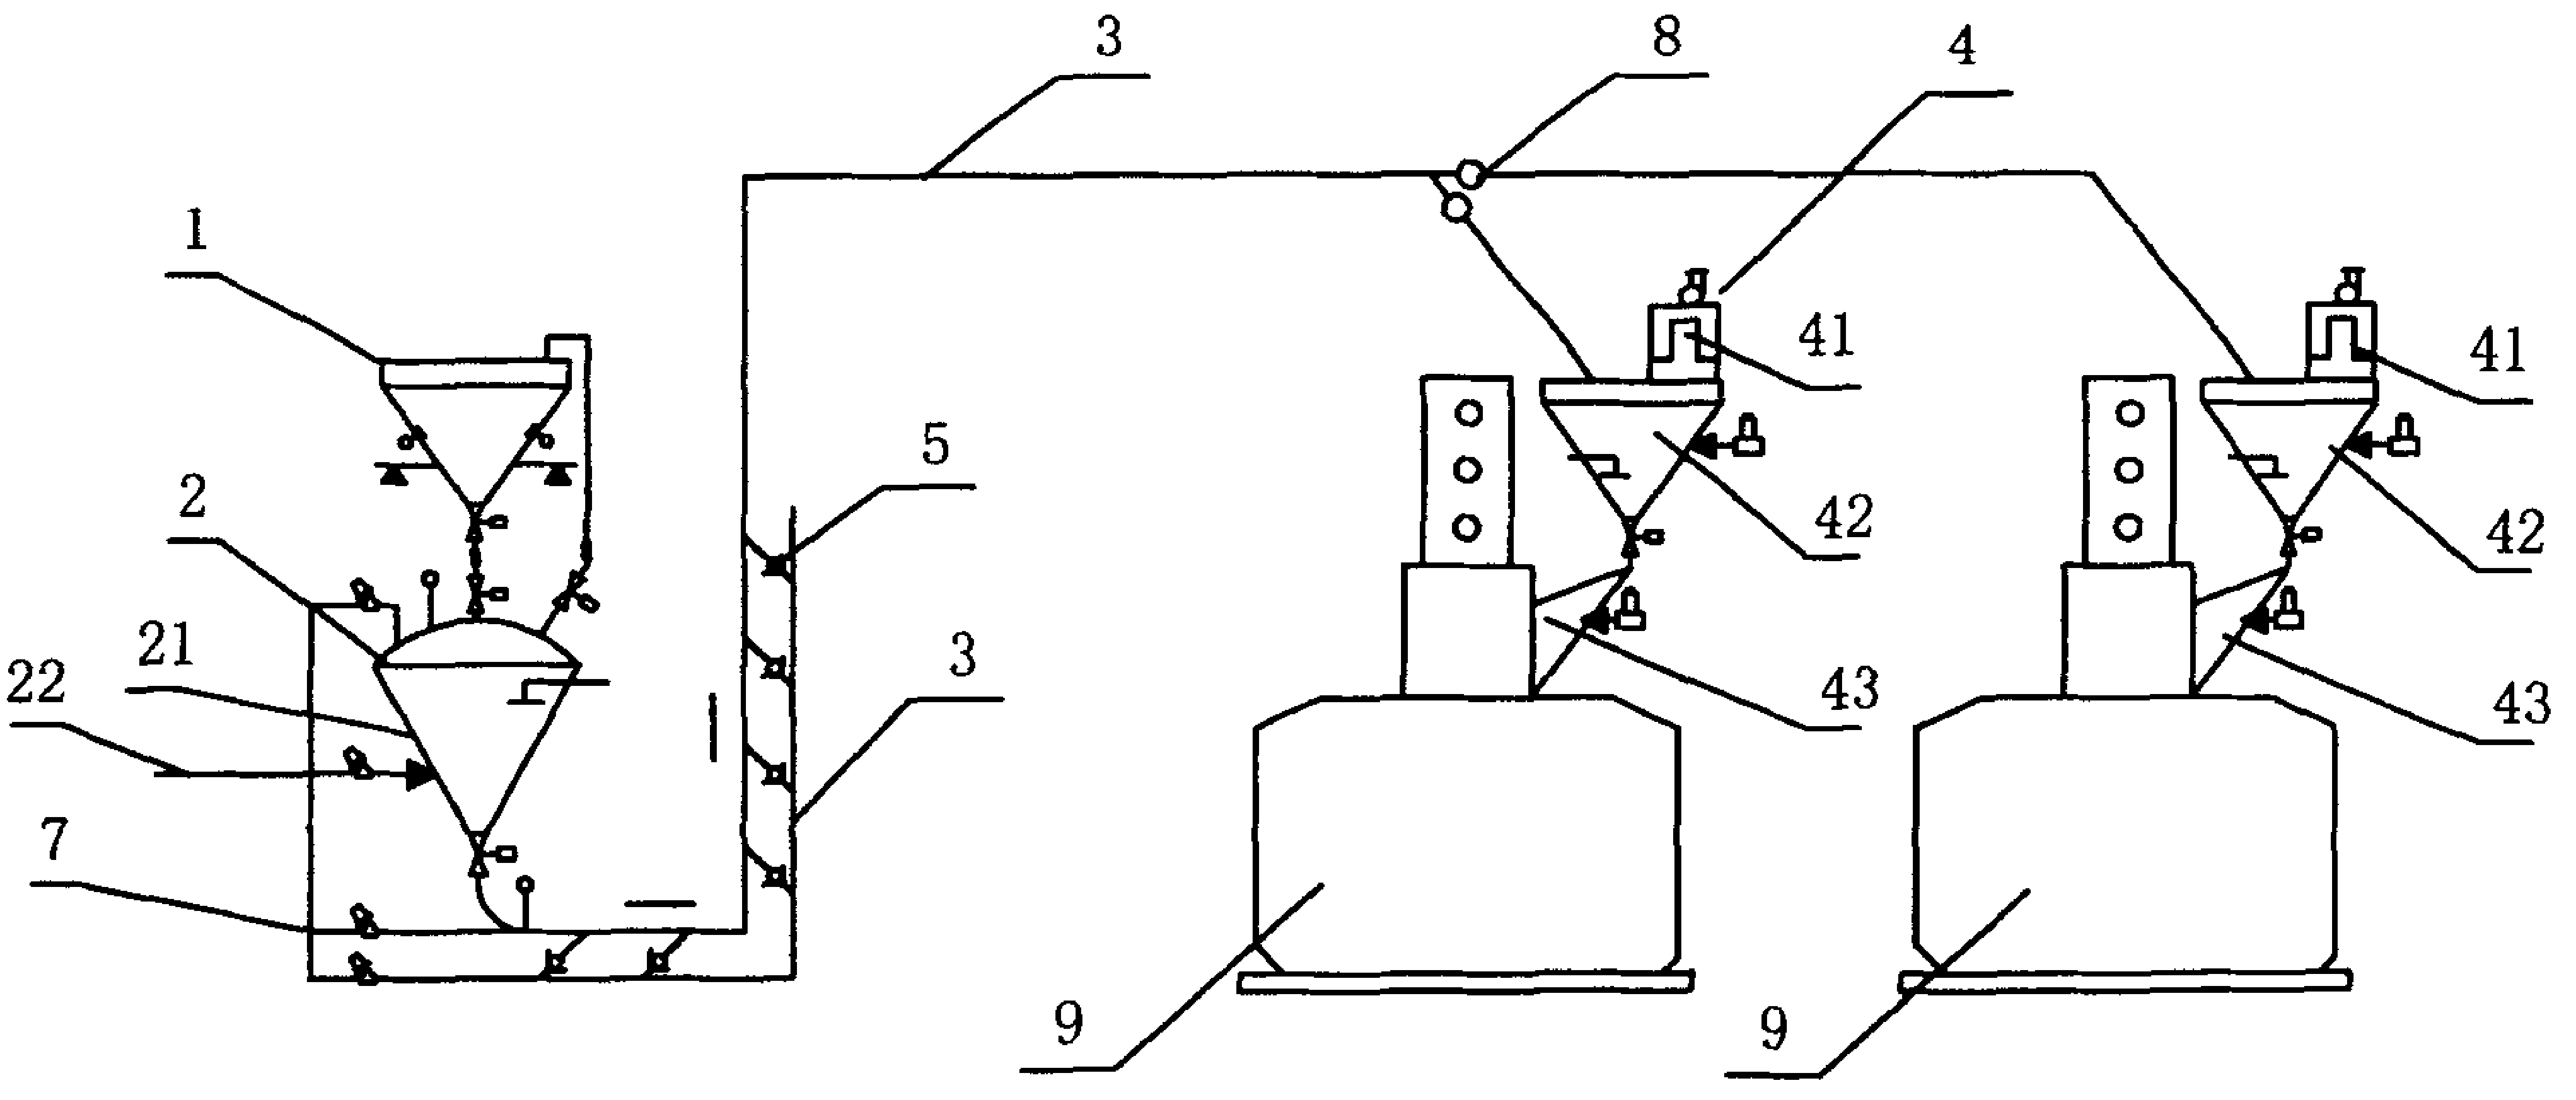 Distribution method of implementing remote weighing transporting